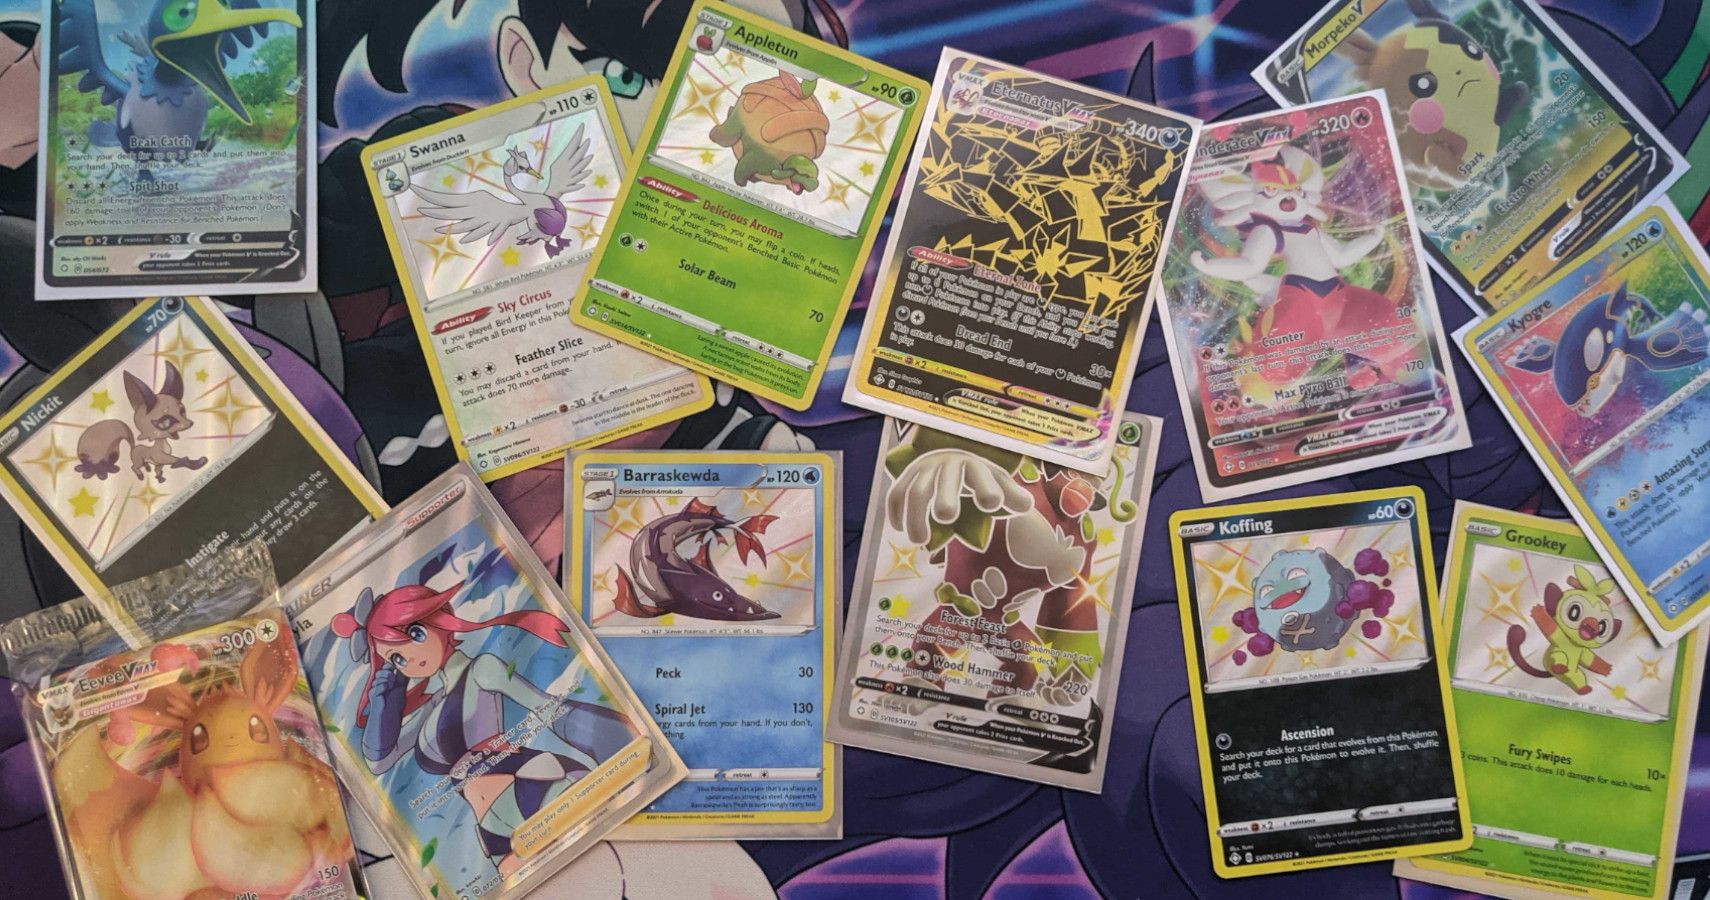 1st Edition Set Of Pokemon Cards, Including A Charizard, Sells For